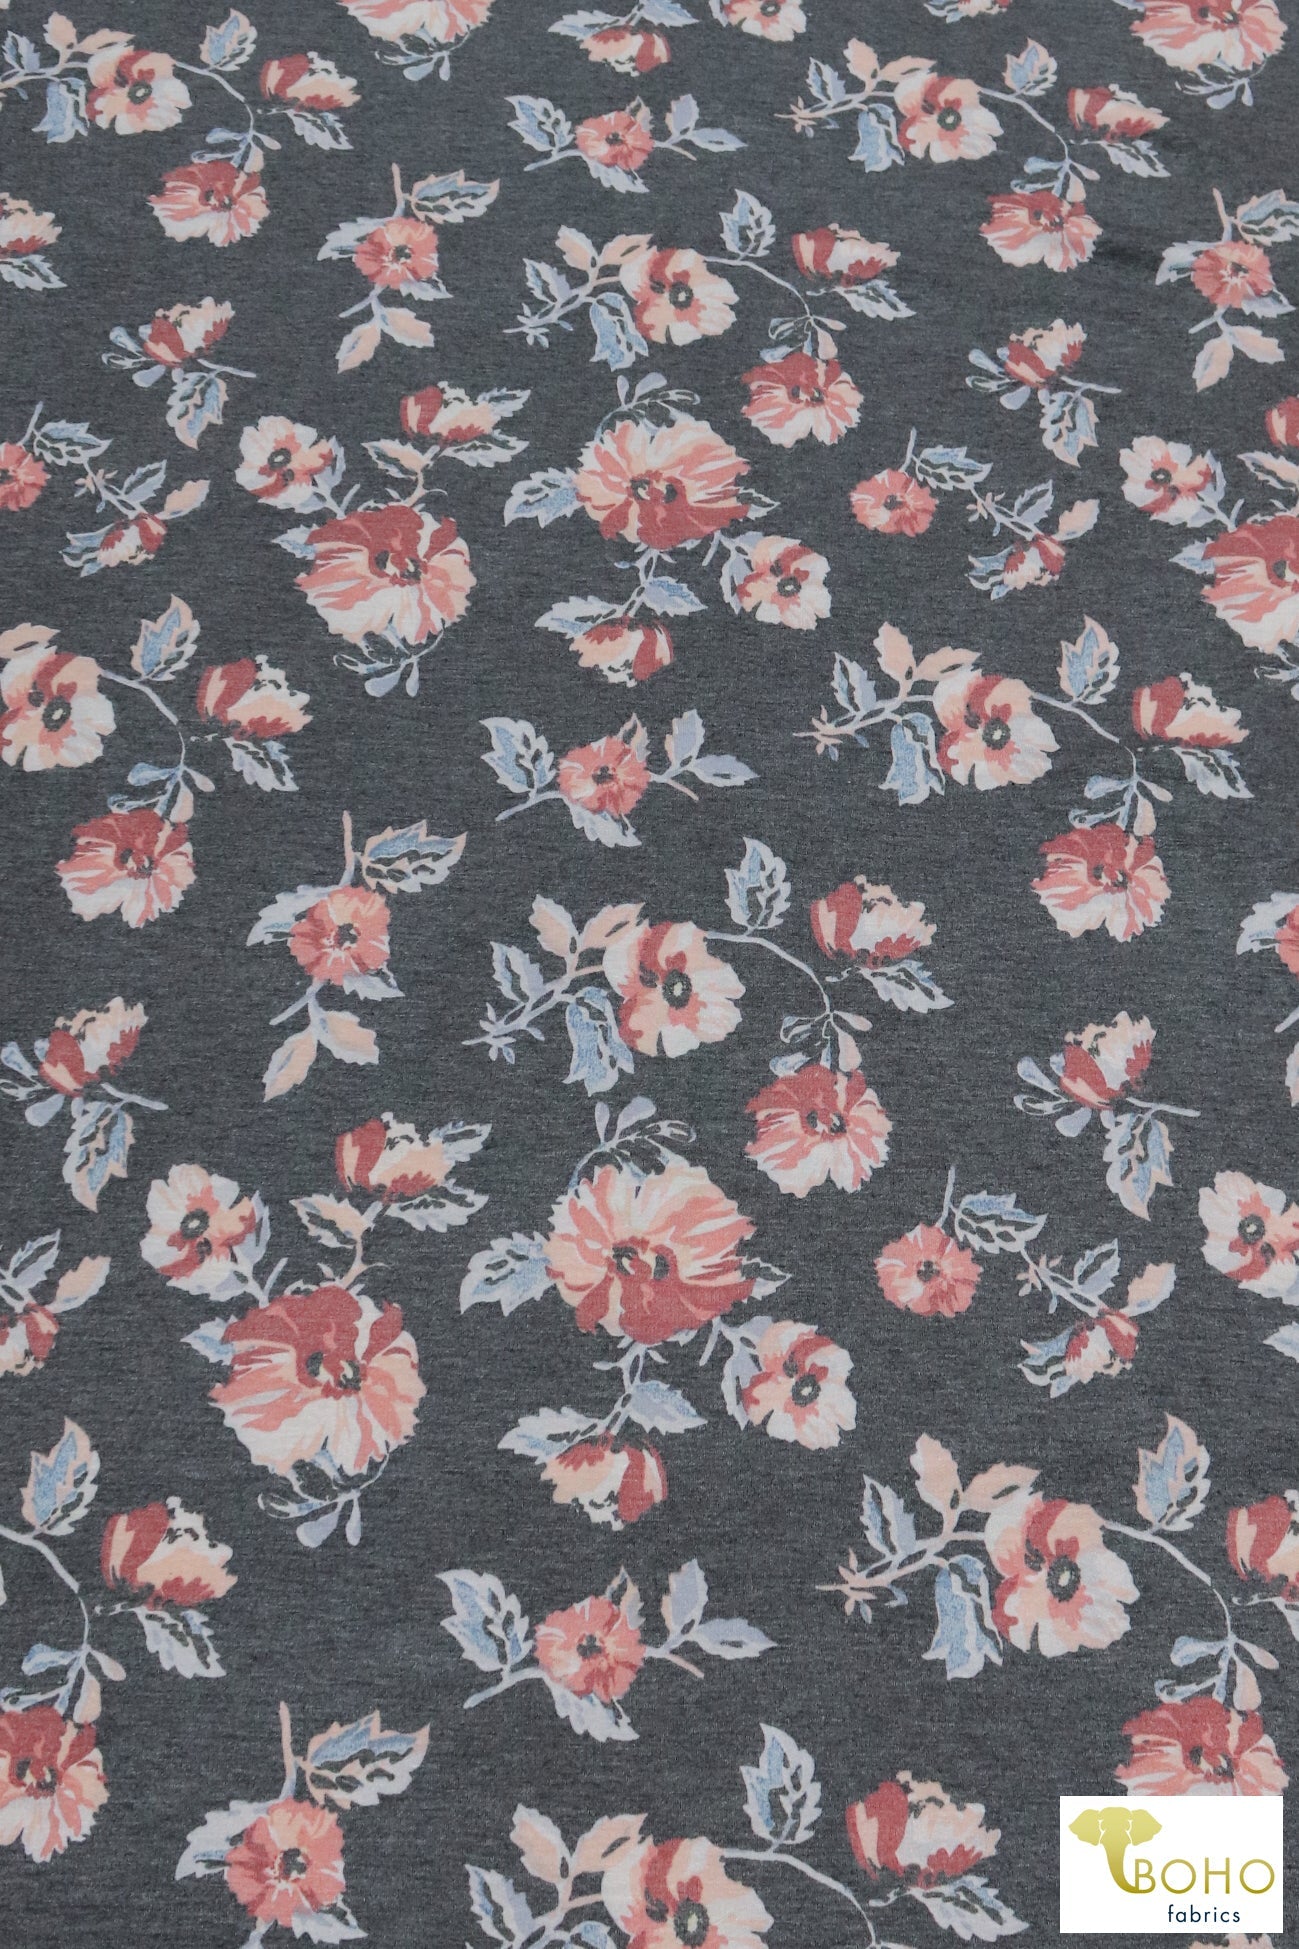 Dusty Rose Cosmos on Gray, French Terry Knit Print. FTP-330-GRY - Boho Fabrics